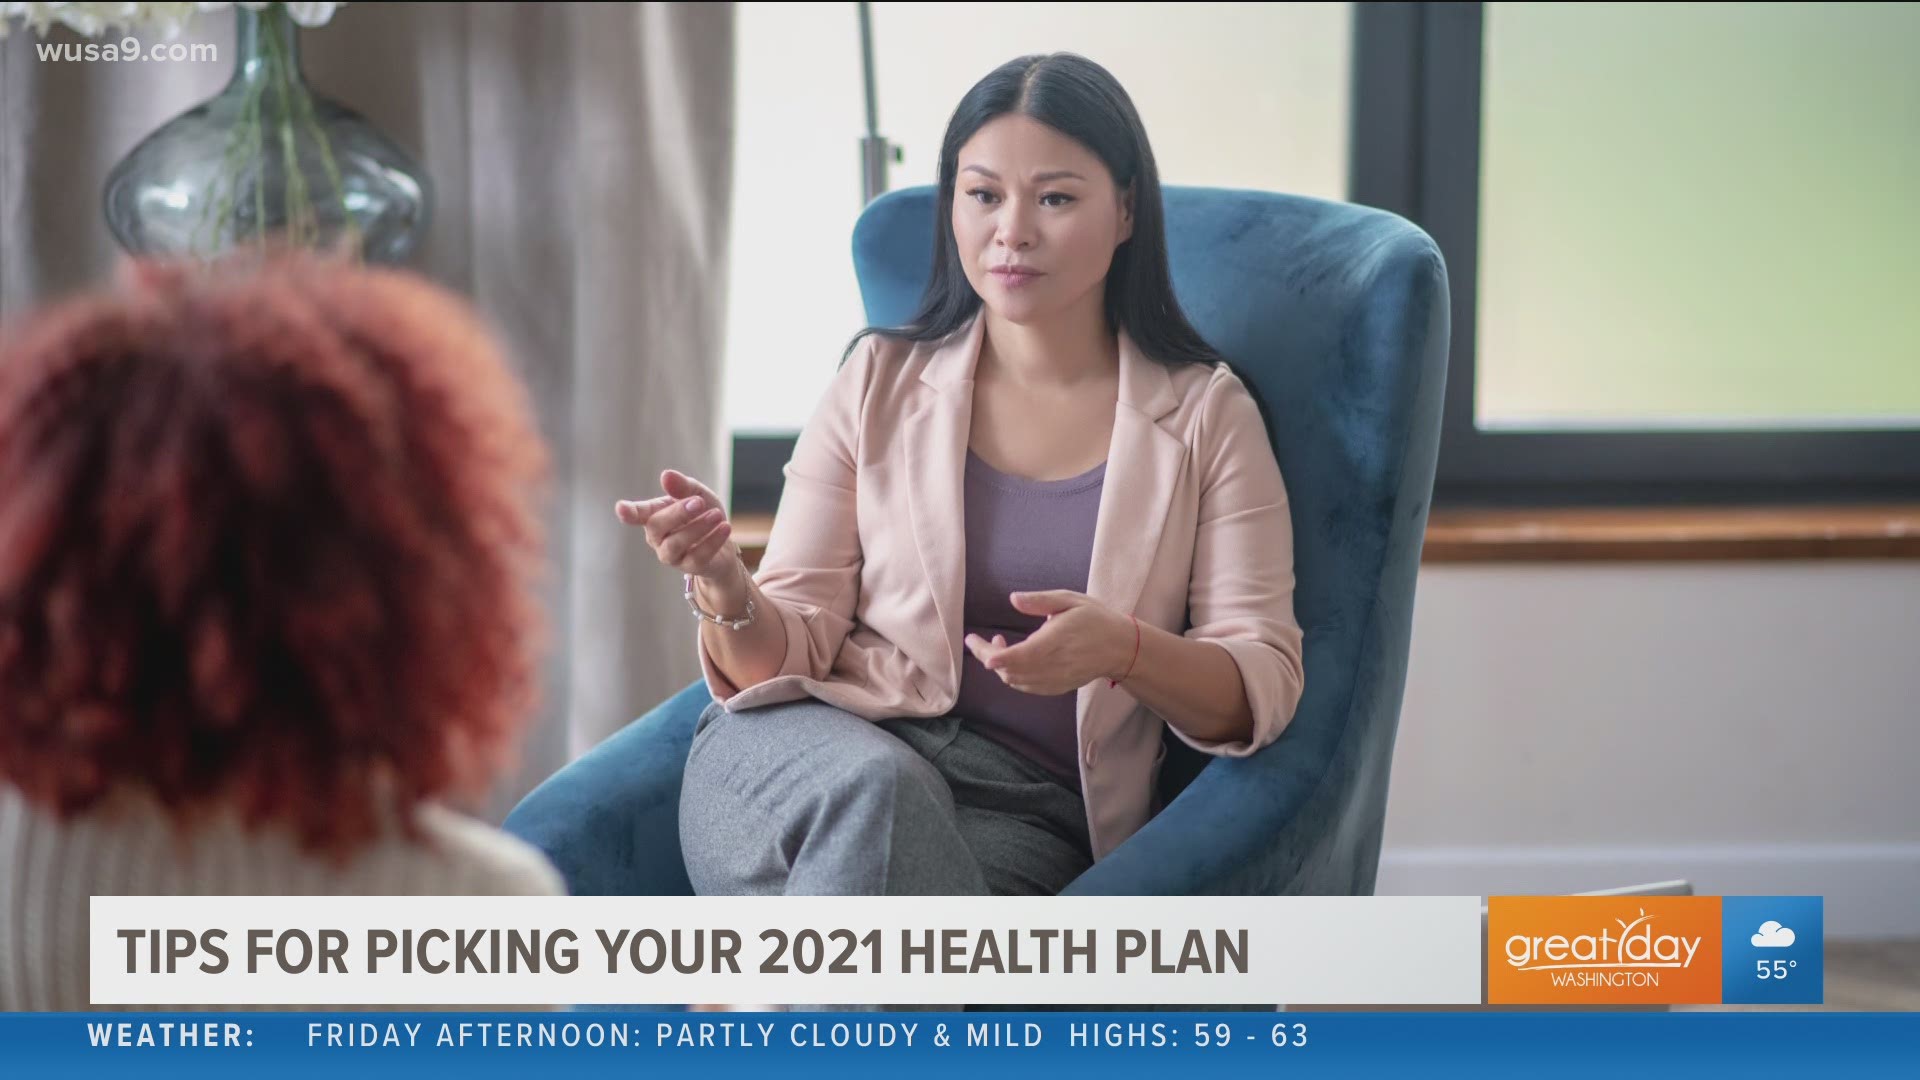 Choosing a healthcare plan can be confusing so we breakdown the do's and don'ts with healthcare strategist Derek Winn.